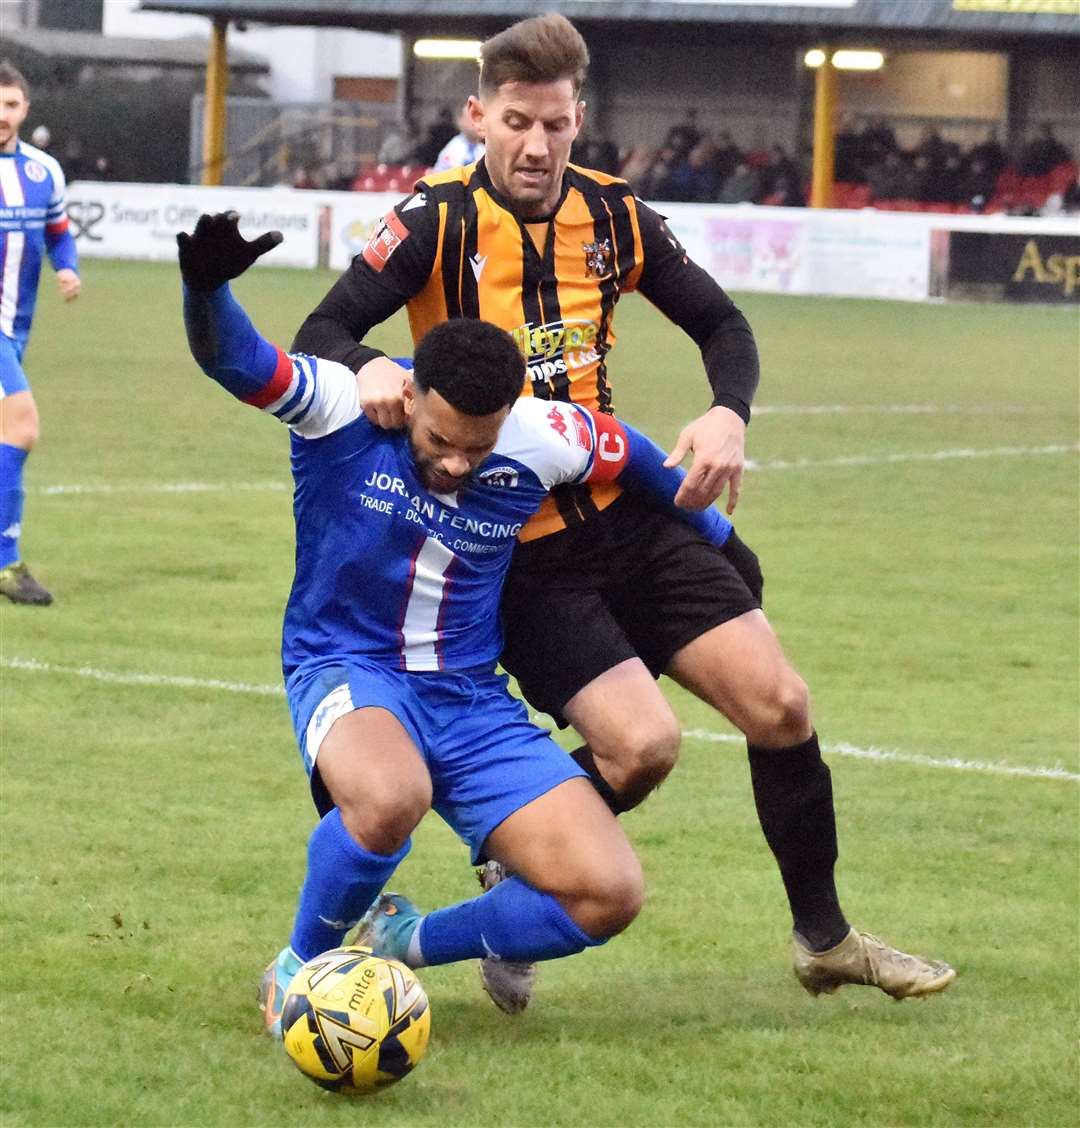 Invicta's James Rogers closes down an away player. Picture: Randolph File